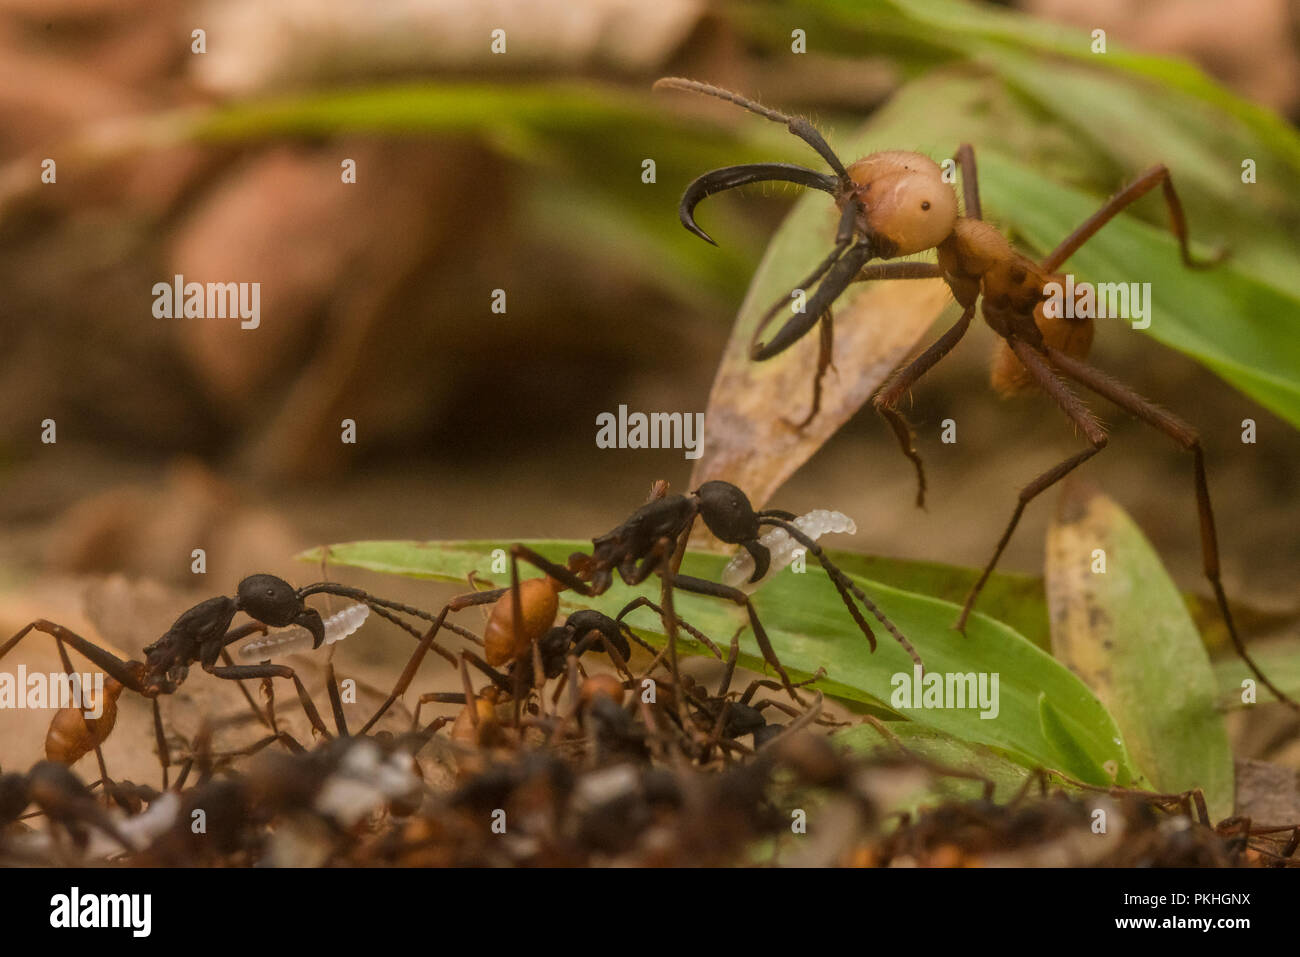 Army ants swarm across the forest floor in huge numbers.  This is Eciton burchellii a common species in South America. Stock Photo